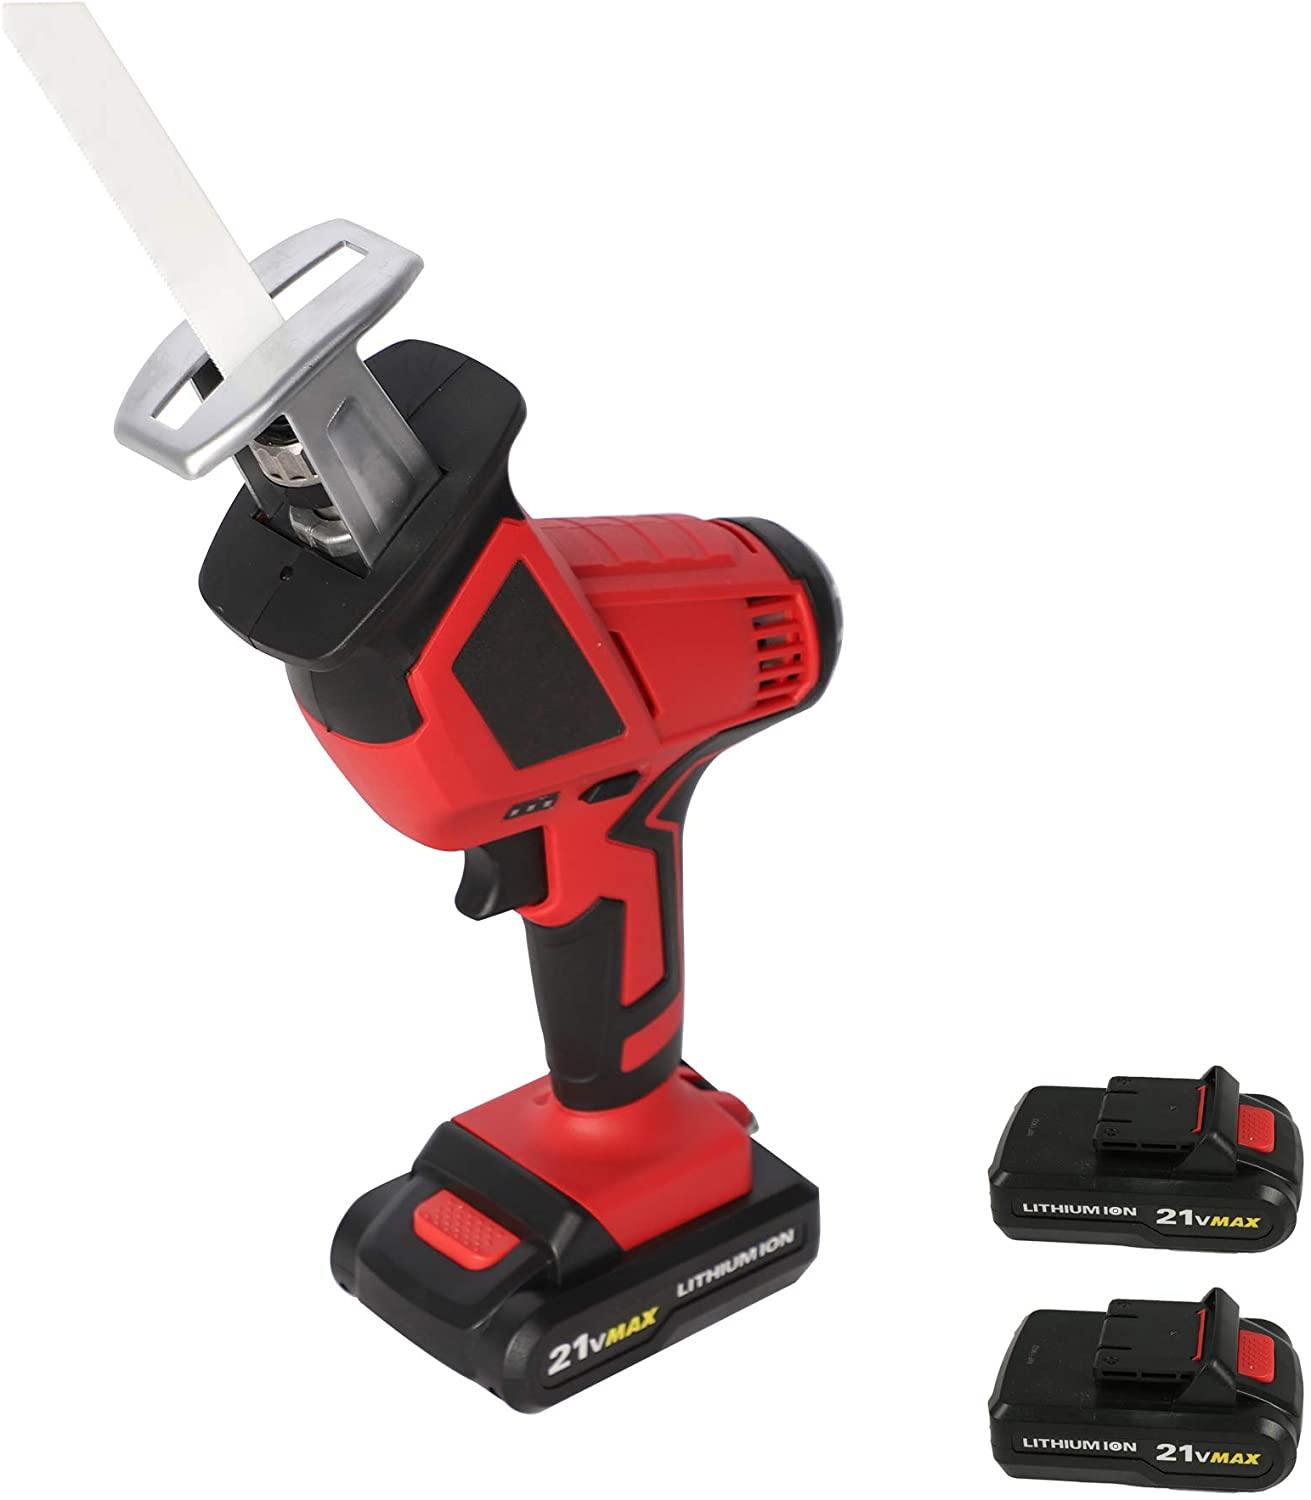 20-Volt Max Lithium-Ion Cordless Reciprocating Saw, w/2 Batteries, Portable & Lightweight One Hand Compact Reciprocating - Bosonshop